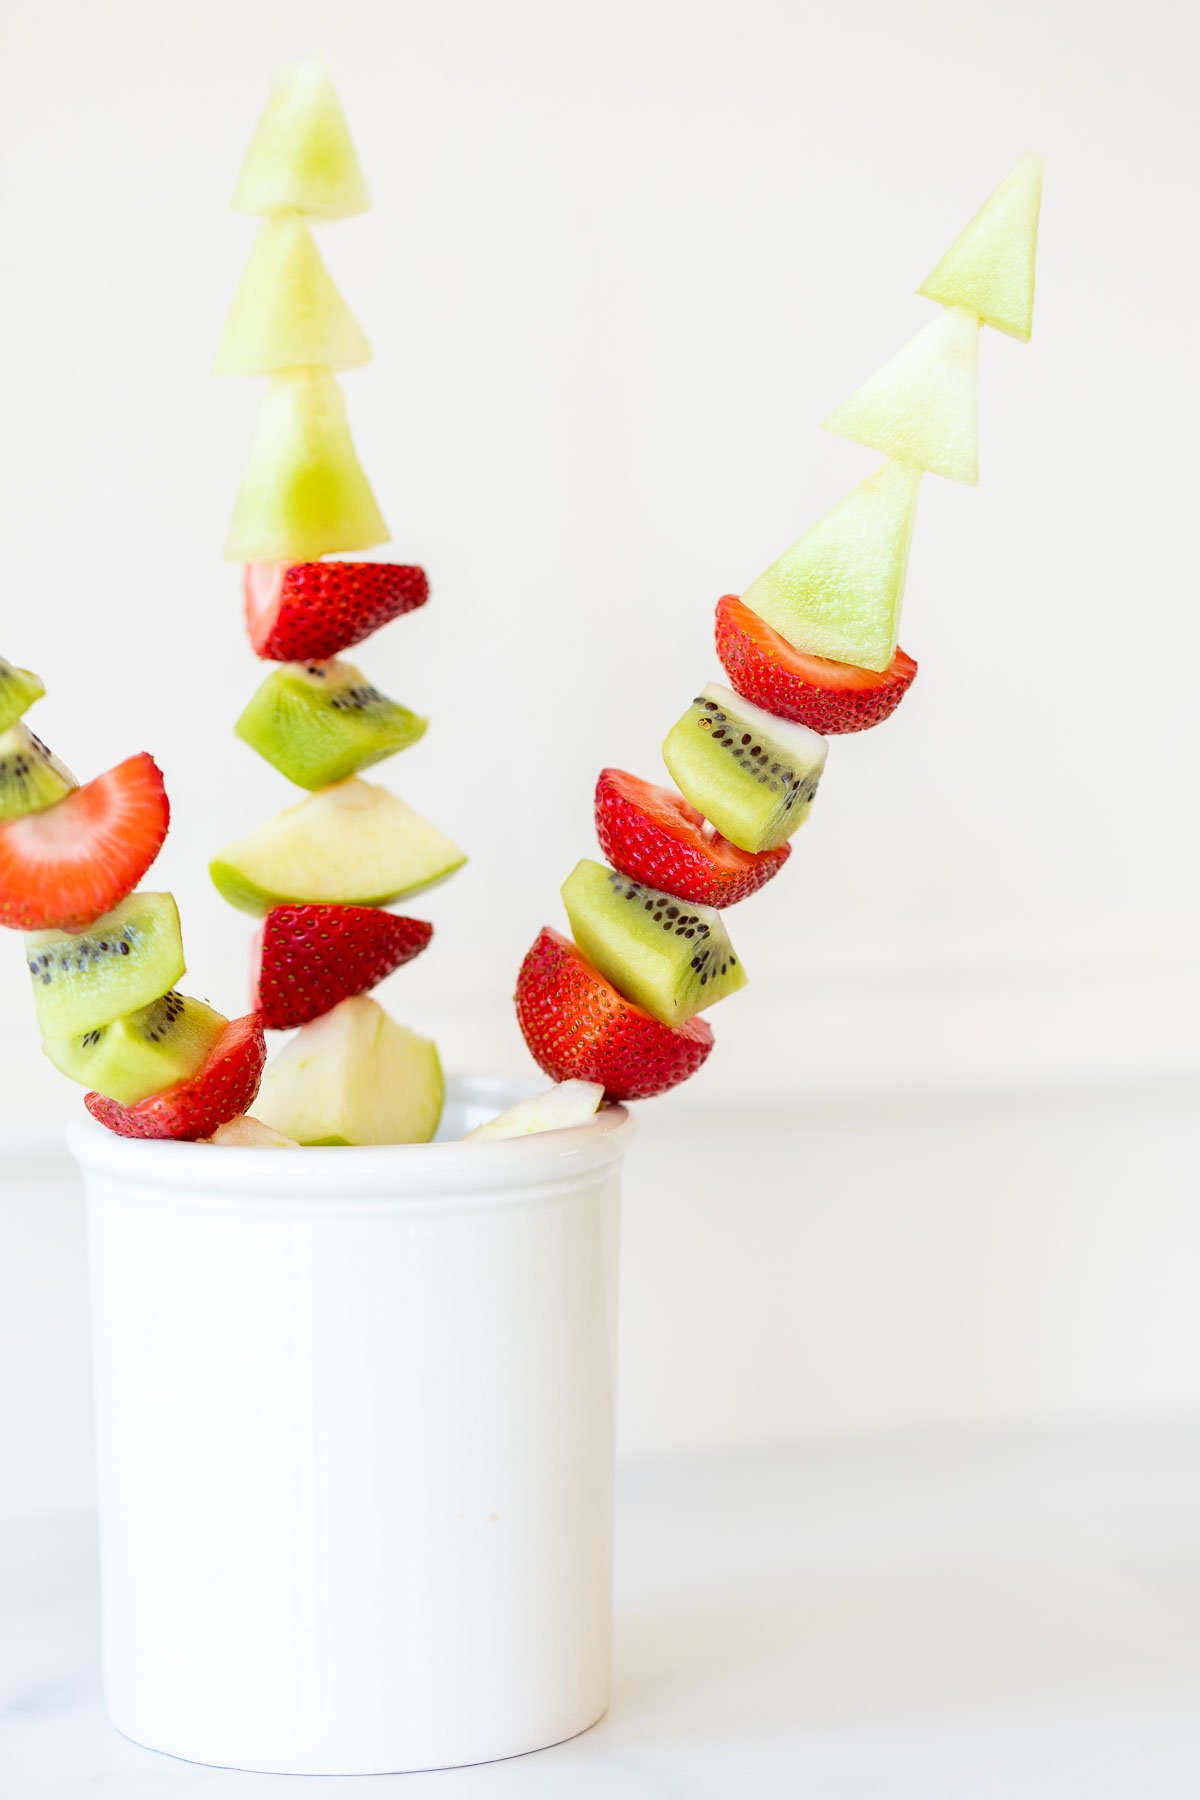 Green and red fruit skewers in a white container.